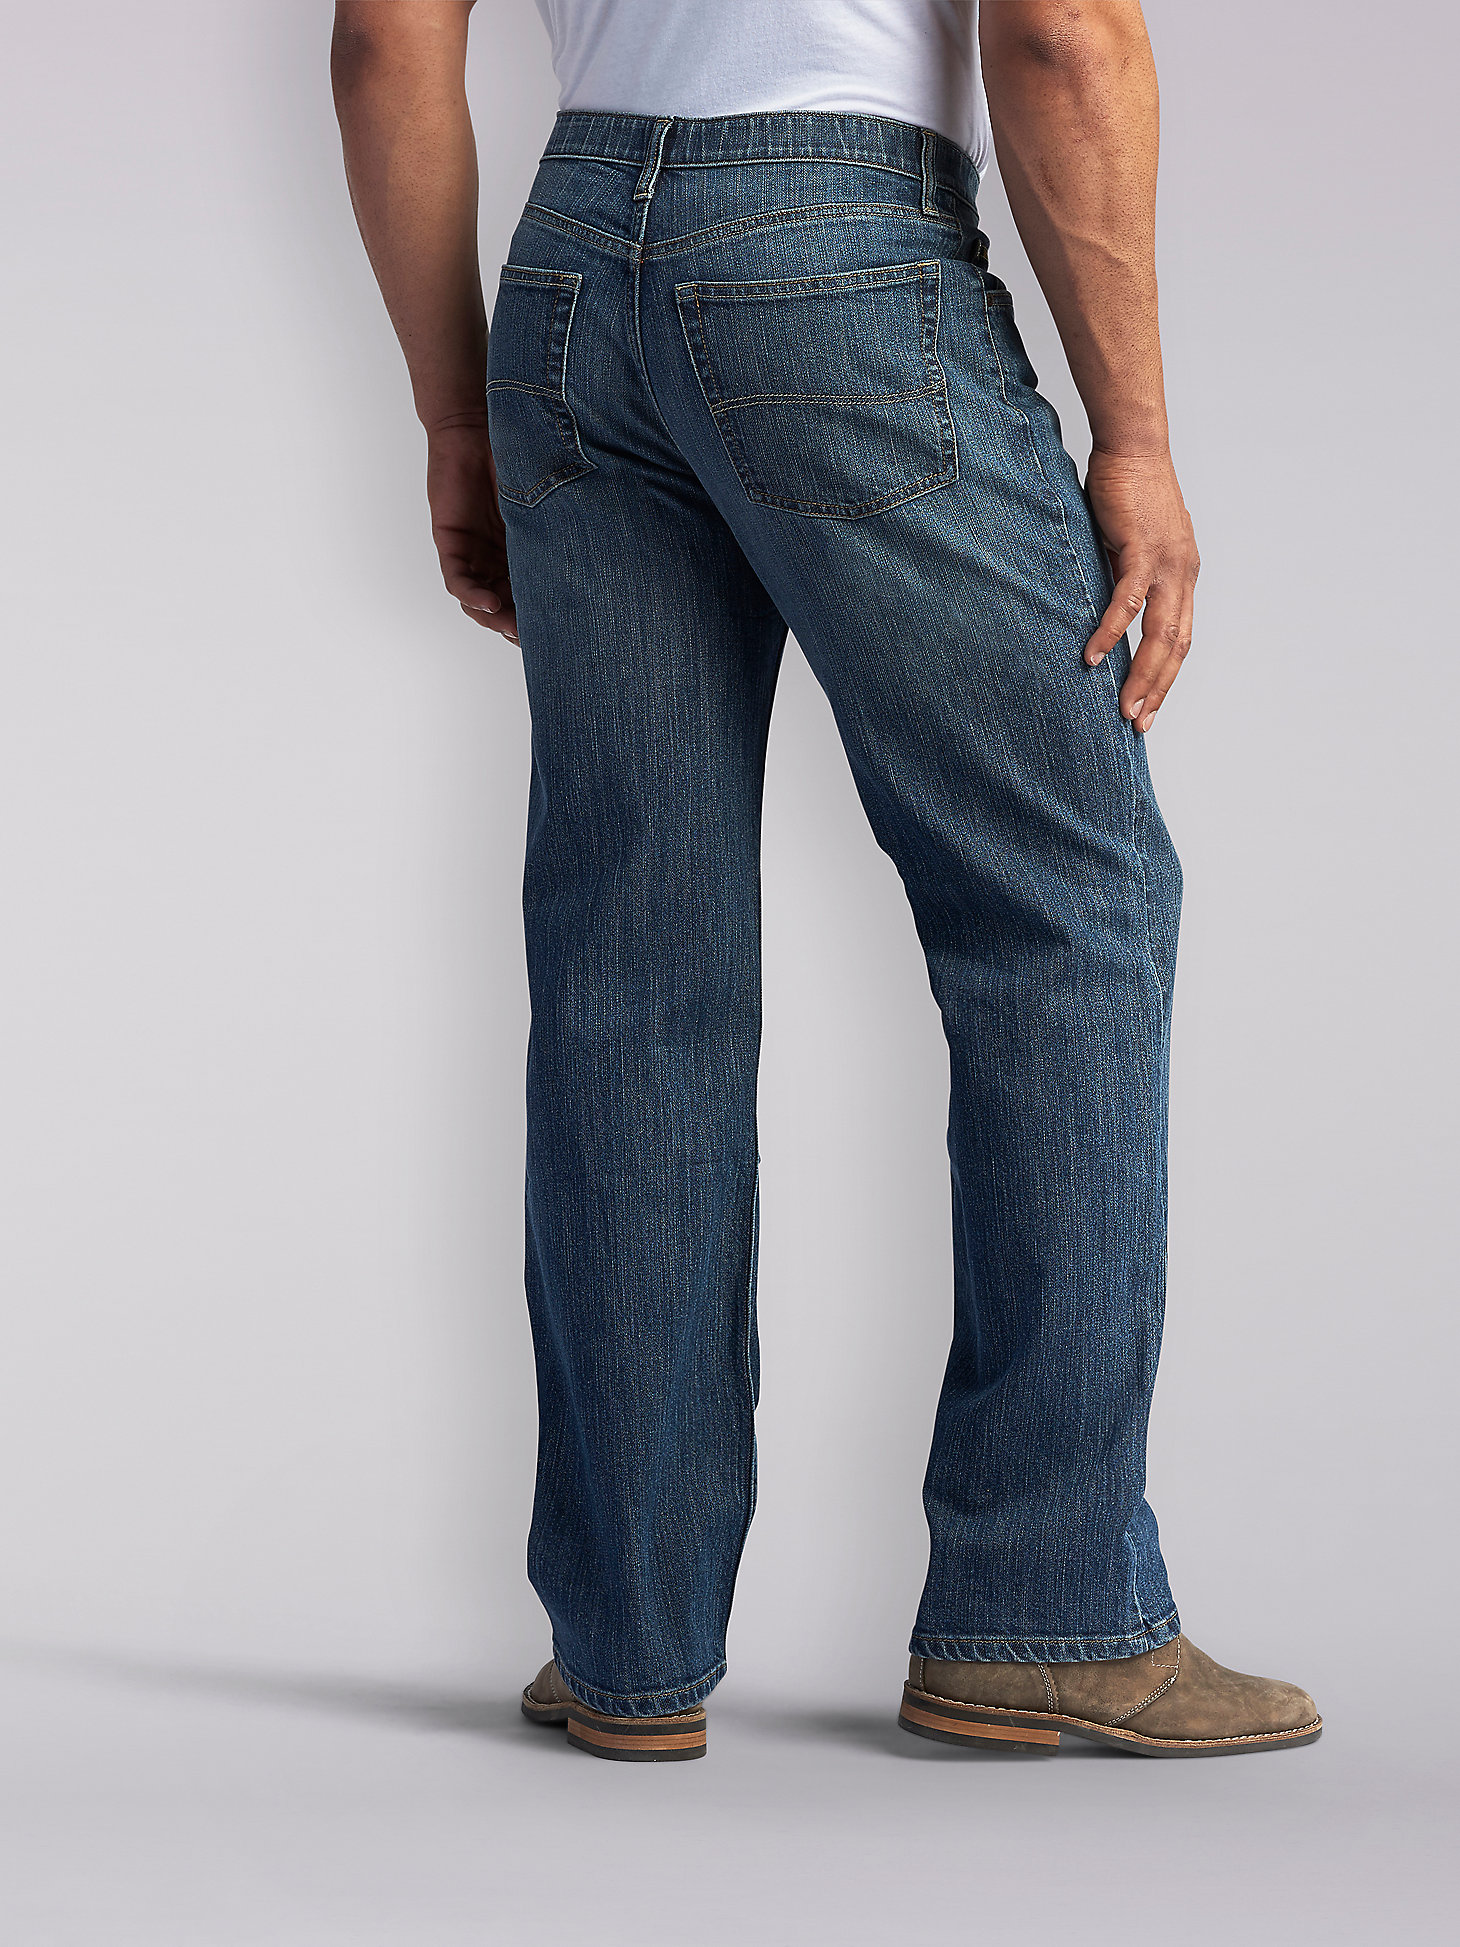 Men’s Premium Select Relaxed Fit Straight Leg Jean (Big&Tall) in Thatch alternative view 1